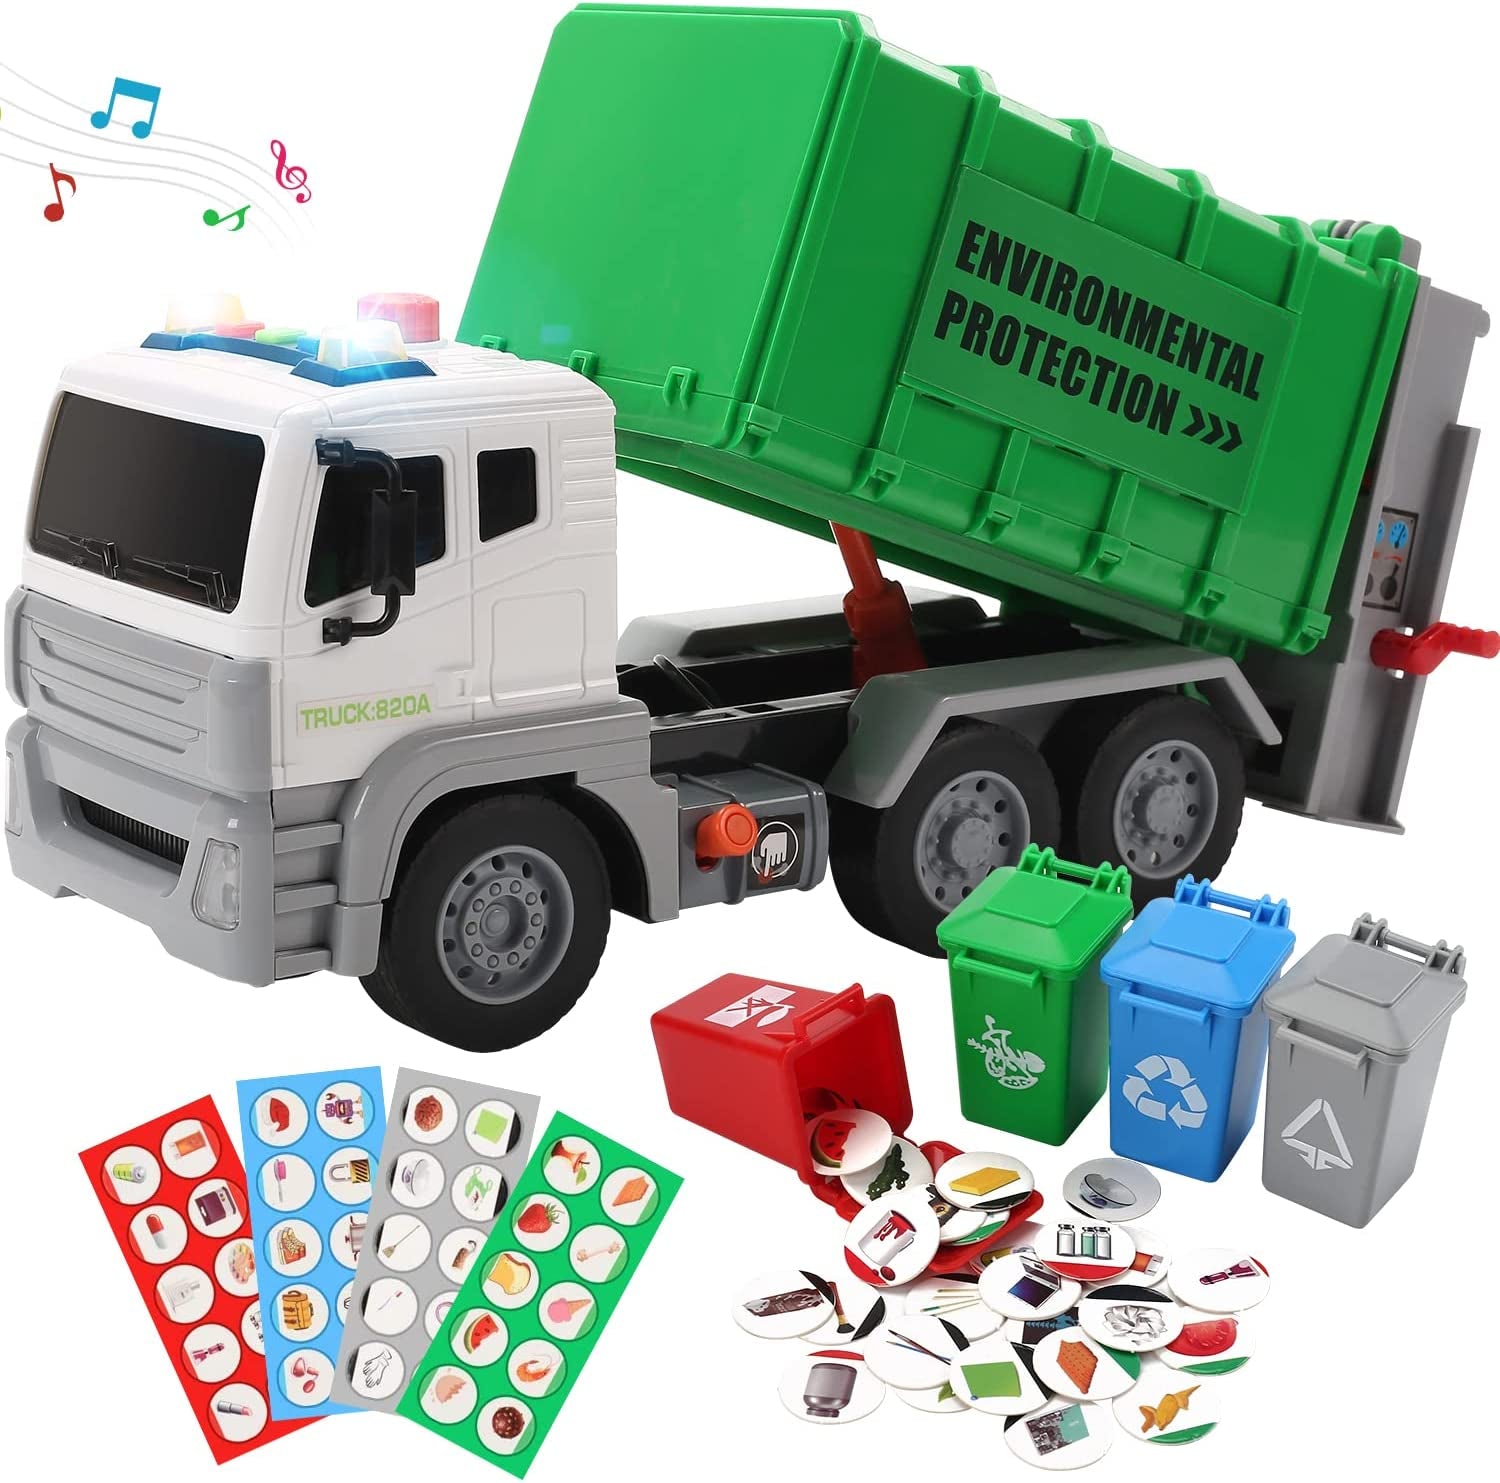 12" Garbage Truck Toys Trash Truck Recycle Truck with Sound and Light, Friction Powered Truck with 4 Garbage Cans, Push and Go Pull Back Car, Environmental Education Toys, Birthday Gift for Boys